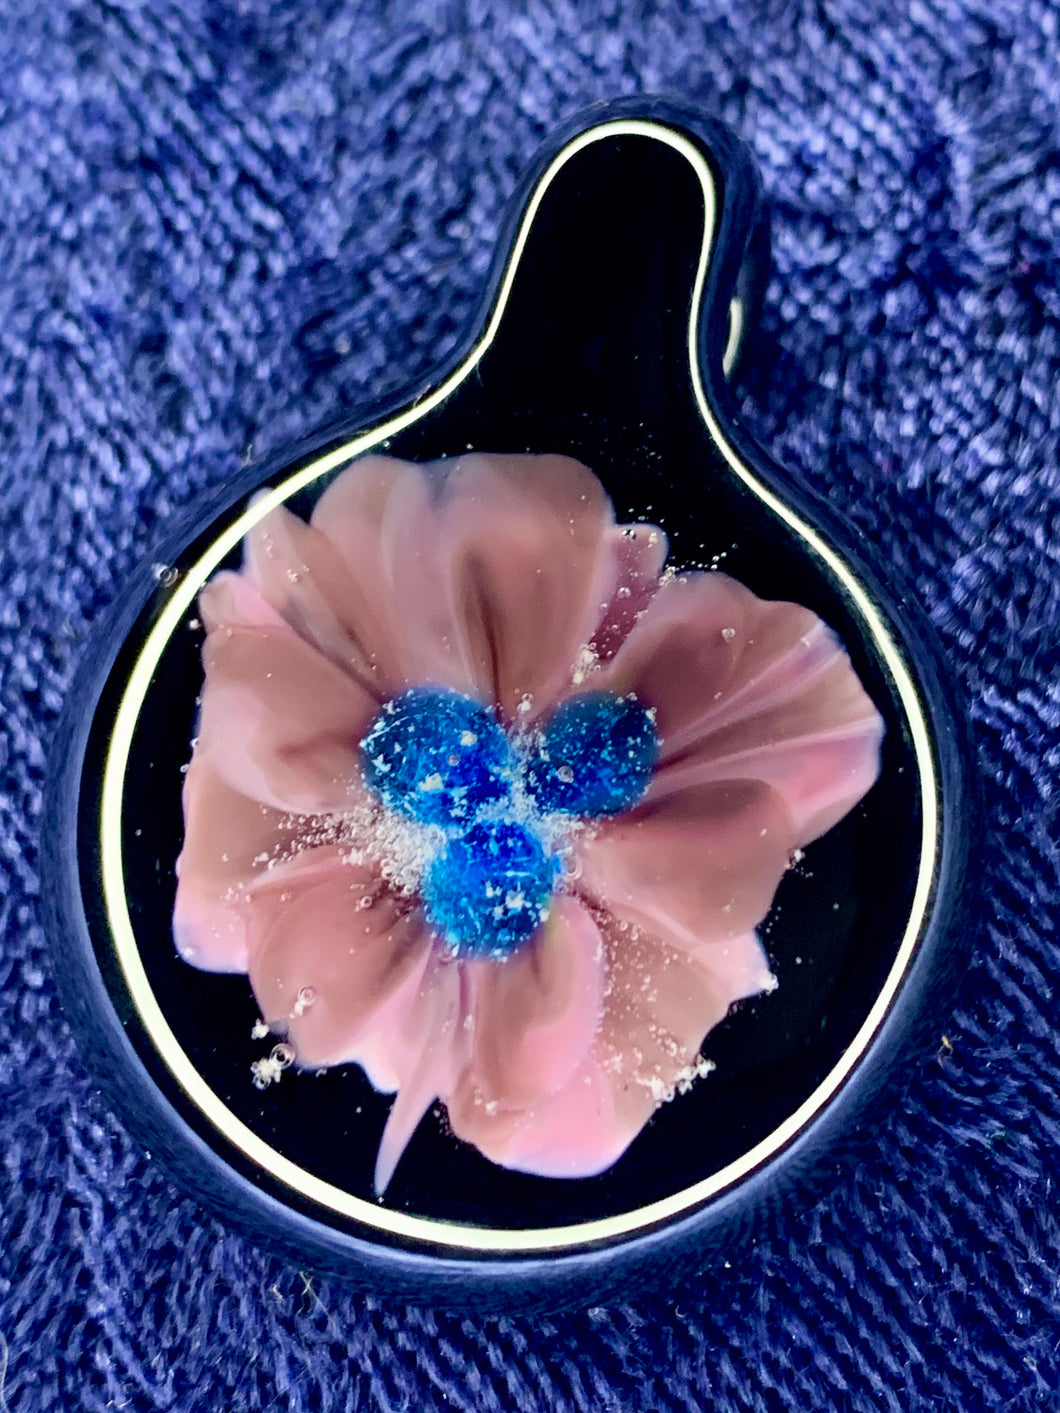 Custom Glass Cremation Flower Pendant - Made to Order